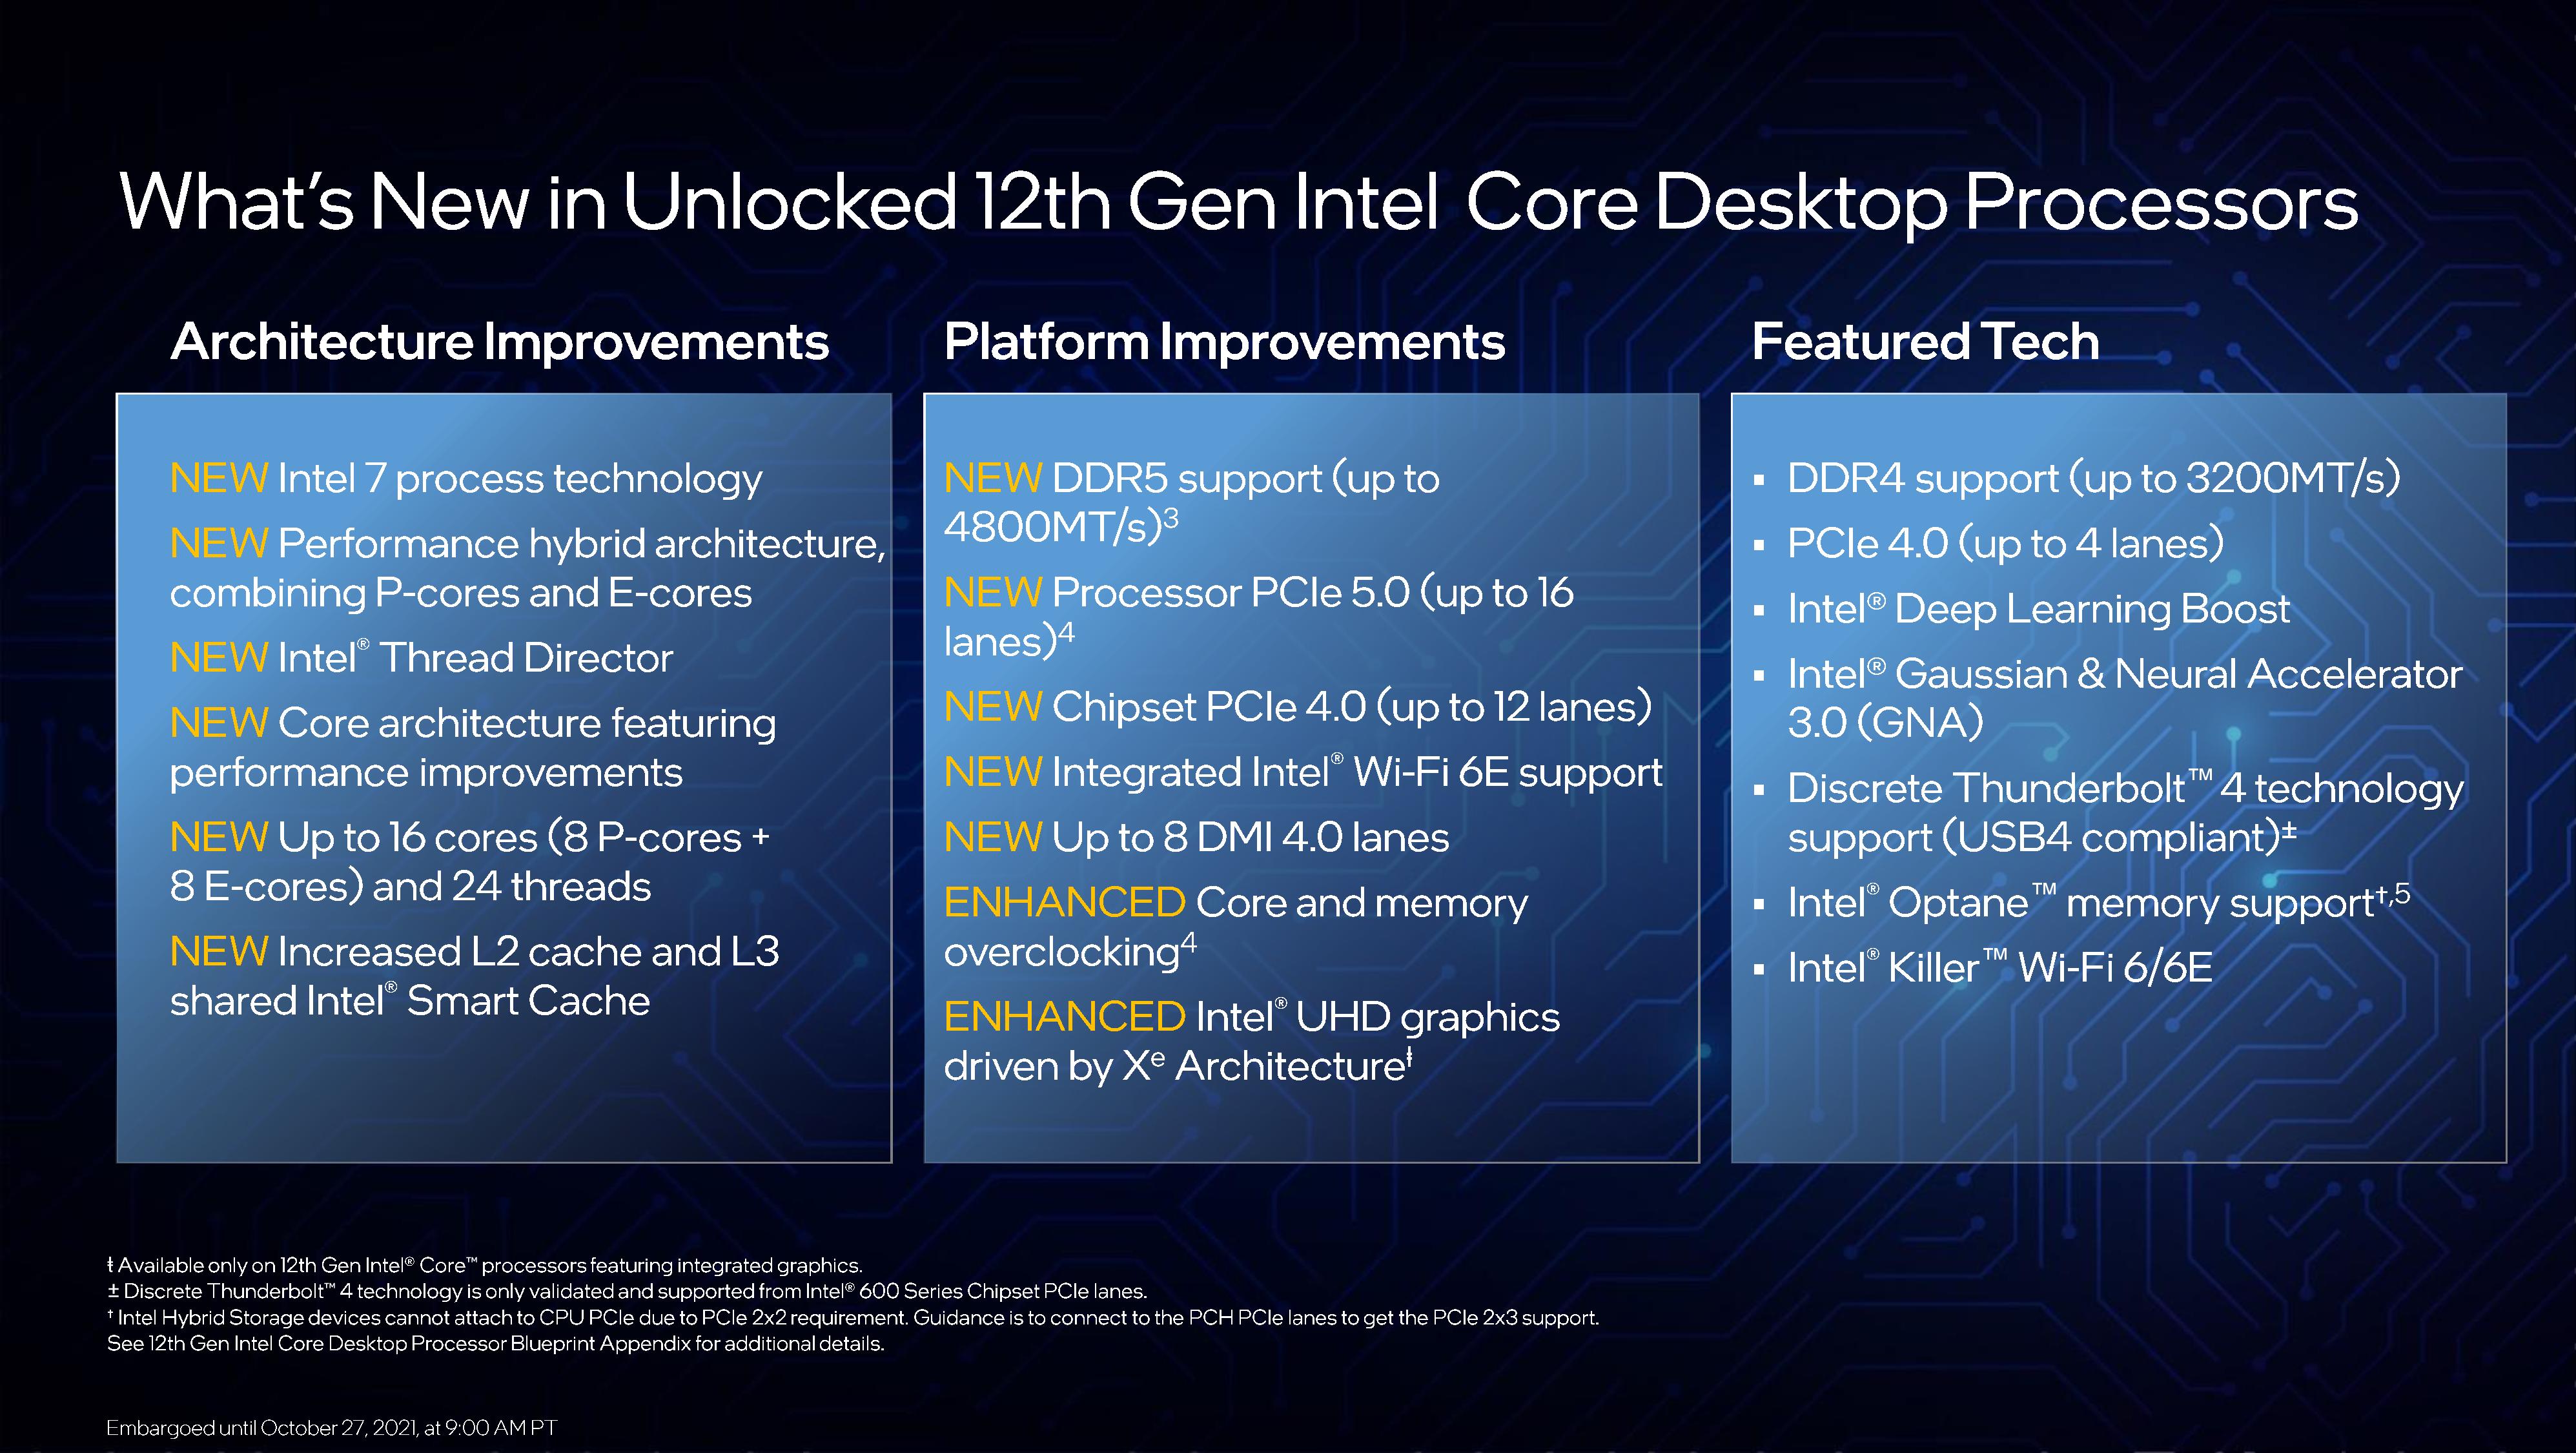 5 years of Intel CPUs and chipsets have a concerning flaw that's